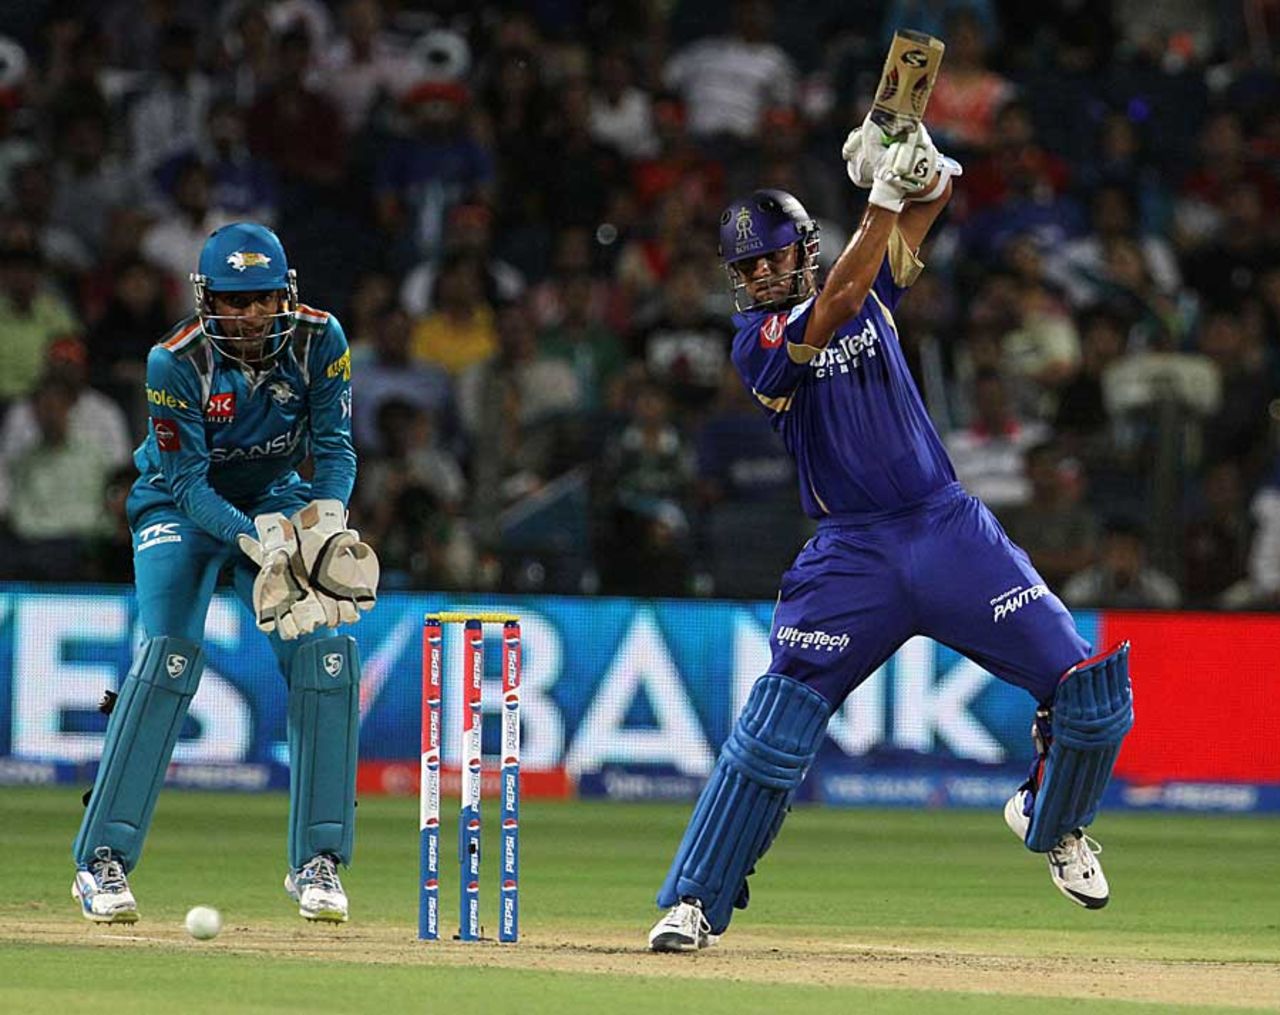 Rahul Dravid punches through the off side, Pune Warriors v Rajasthan Royals, IPL, Pune, April 11, 2013